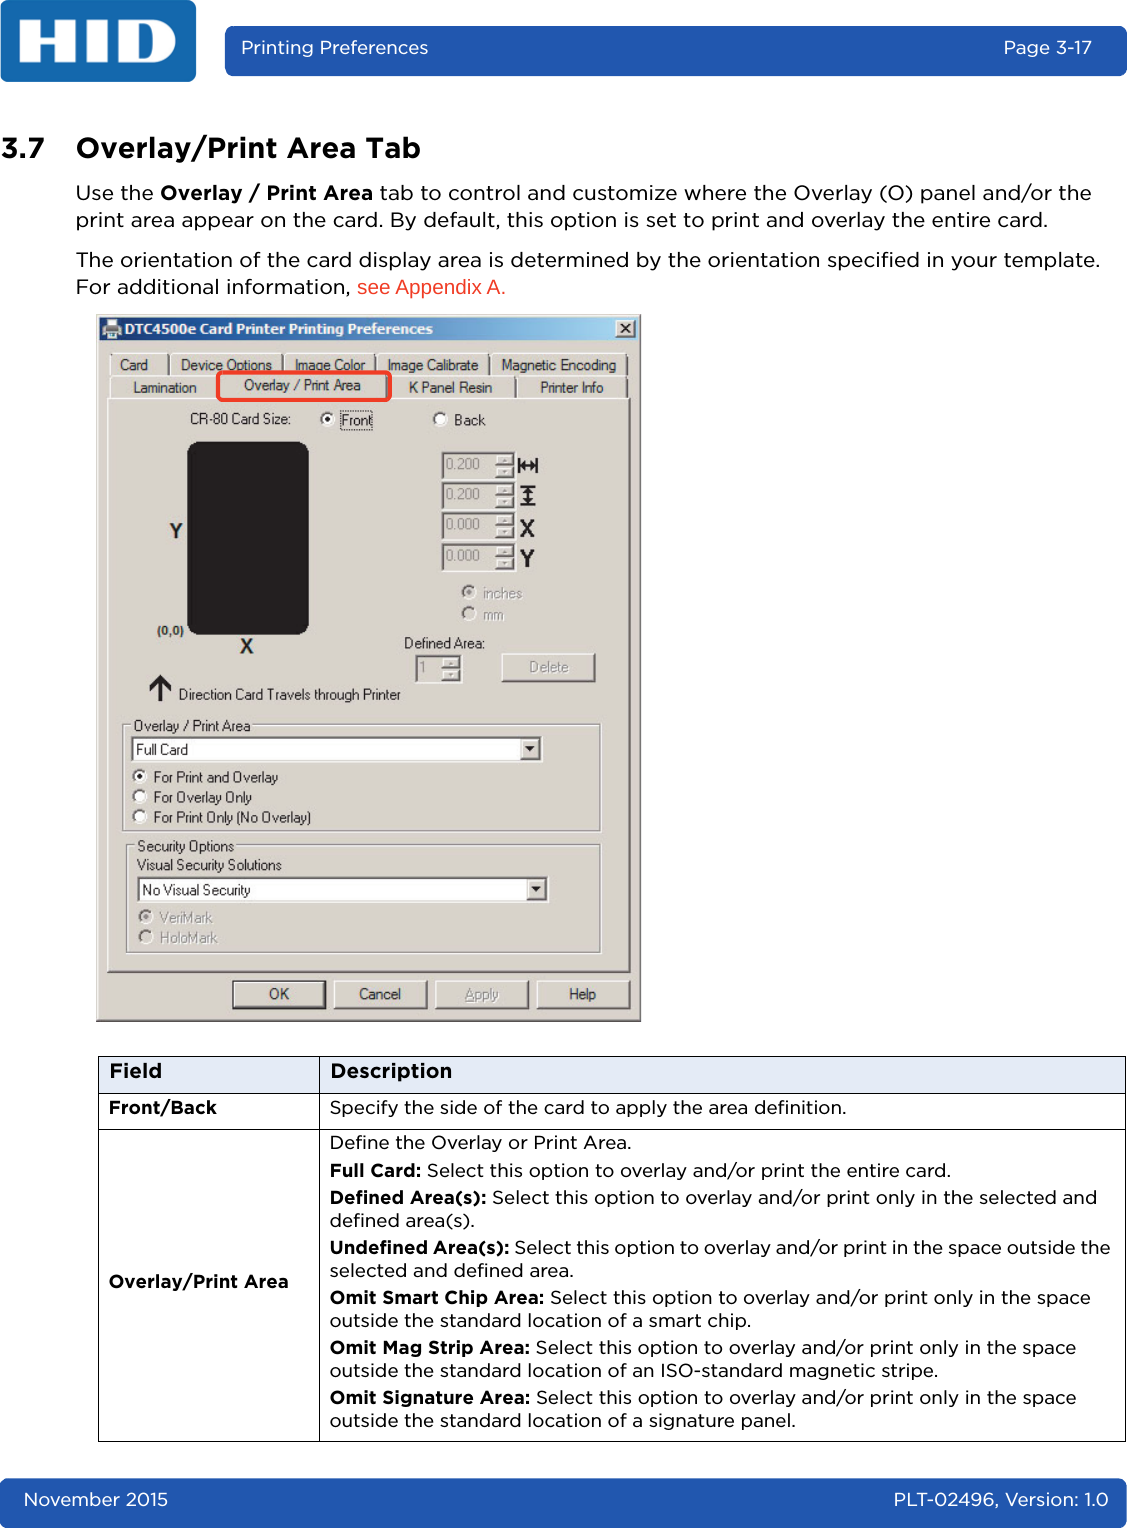 November 2015 PLT-02496, Version: 1.0Printing Preferences Page 3-173.7 Overlay/Print Area TabUse the Overlay / Print Area tab to control and customize where the Overlay (O) panel and/or the print area appear on the card. By default, this option is set to print and overlay the entire card.The orientation of the card display area is determined by the orientation specified in your template. For additional information, see Appendix A.Field DescriptionFront/Back Specify the side of the card to apply the area definition.Overlay/Print AreaDefine the Overlay or Print Area. Full Card: Select this option to overlay and/or print the entire card.Defined Area(s): Select this option to overlay and/or print only in the selected and defined area(s).Undefined Area(s): Select this option to overlay and/or print in the space outside the selected and defined area.Omit Smart Chip Area: Select this option to overlay and/or print only in the space outside the standard location of a smart chip.Omit Mag Strip Area: Select this option to overlay and/or print only in the space outside the standard location of an ISO-standard magnetic stripe.Omit Signature Area: Select this option to overlay and/or print only in the space outside the standard location of a signature panel.